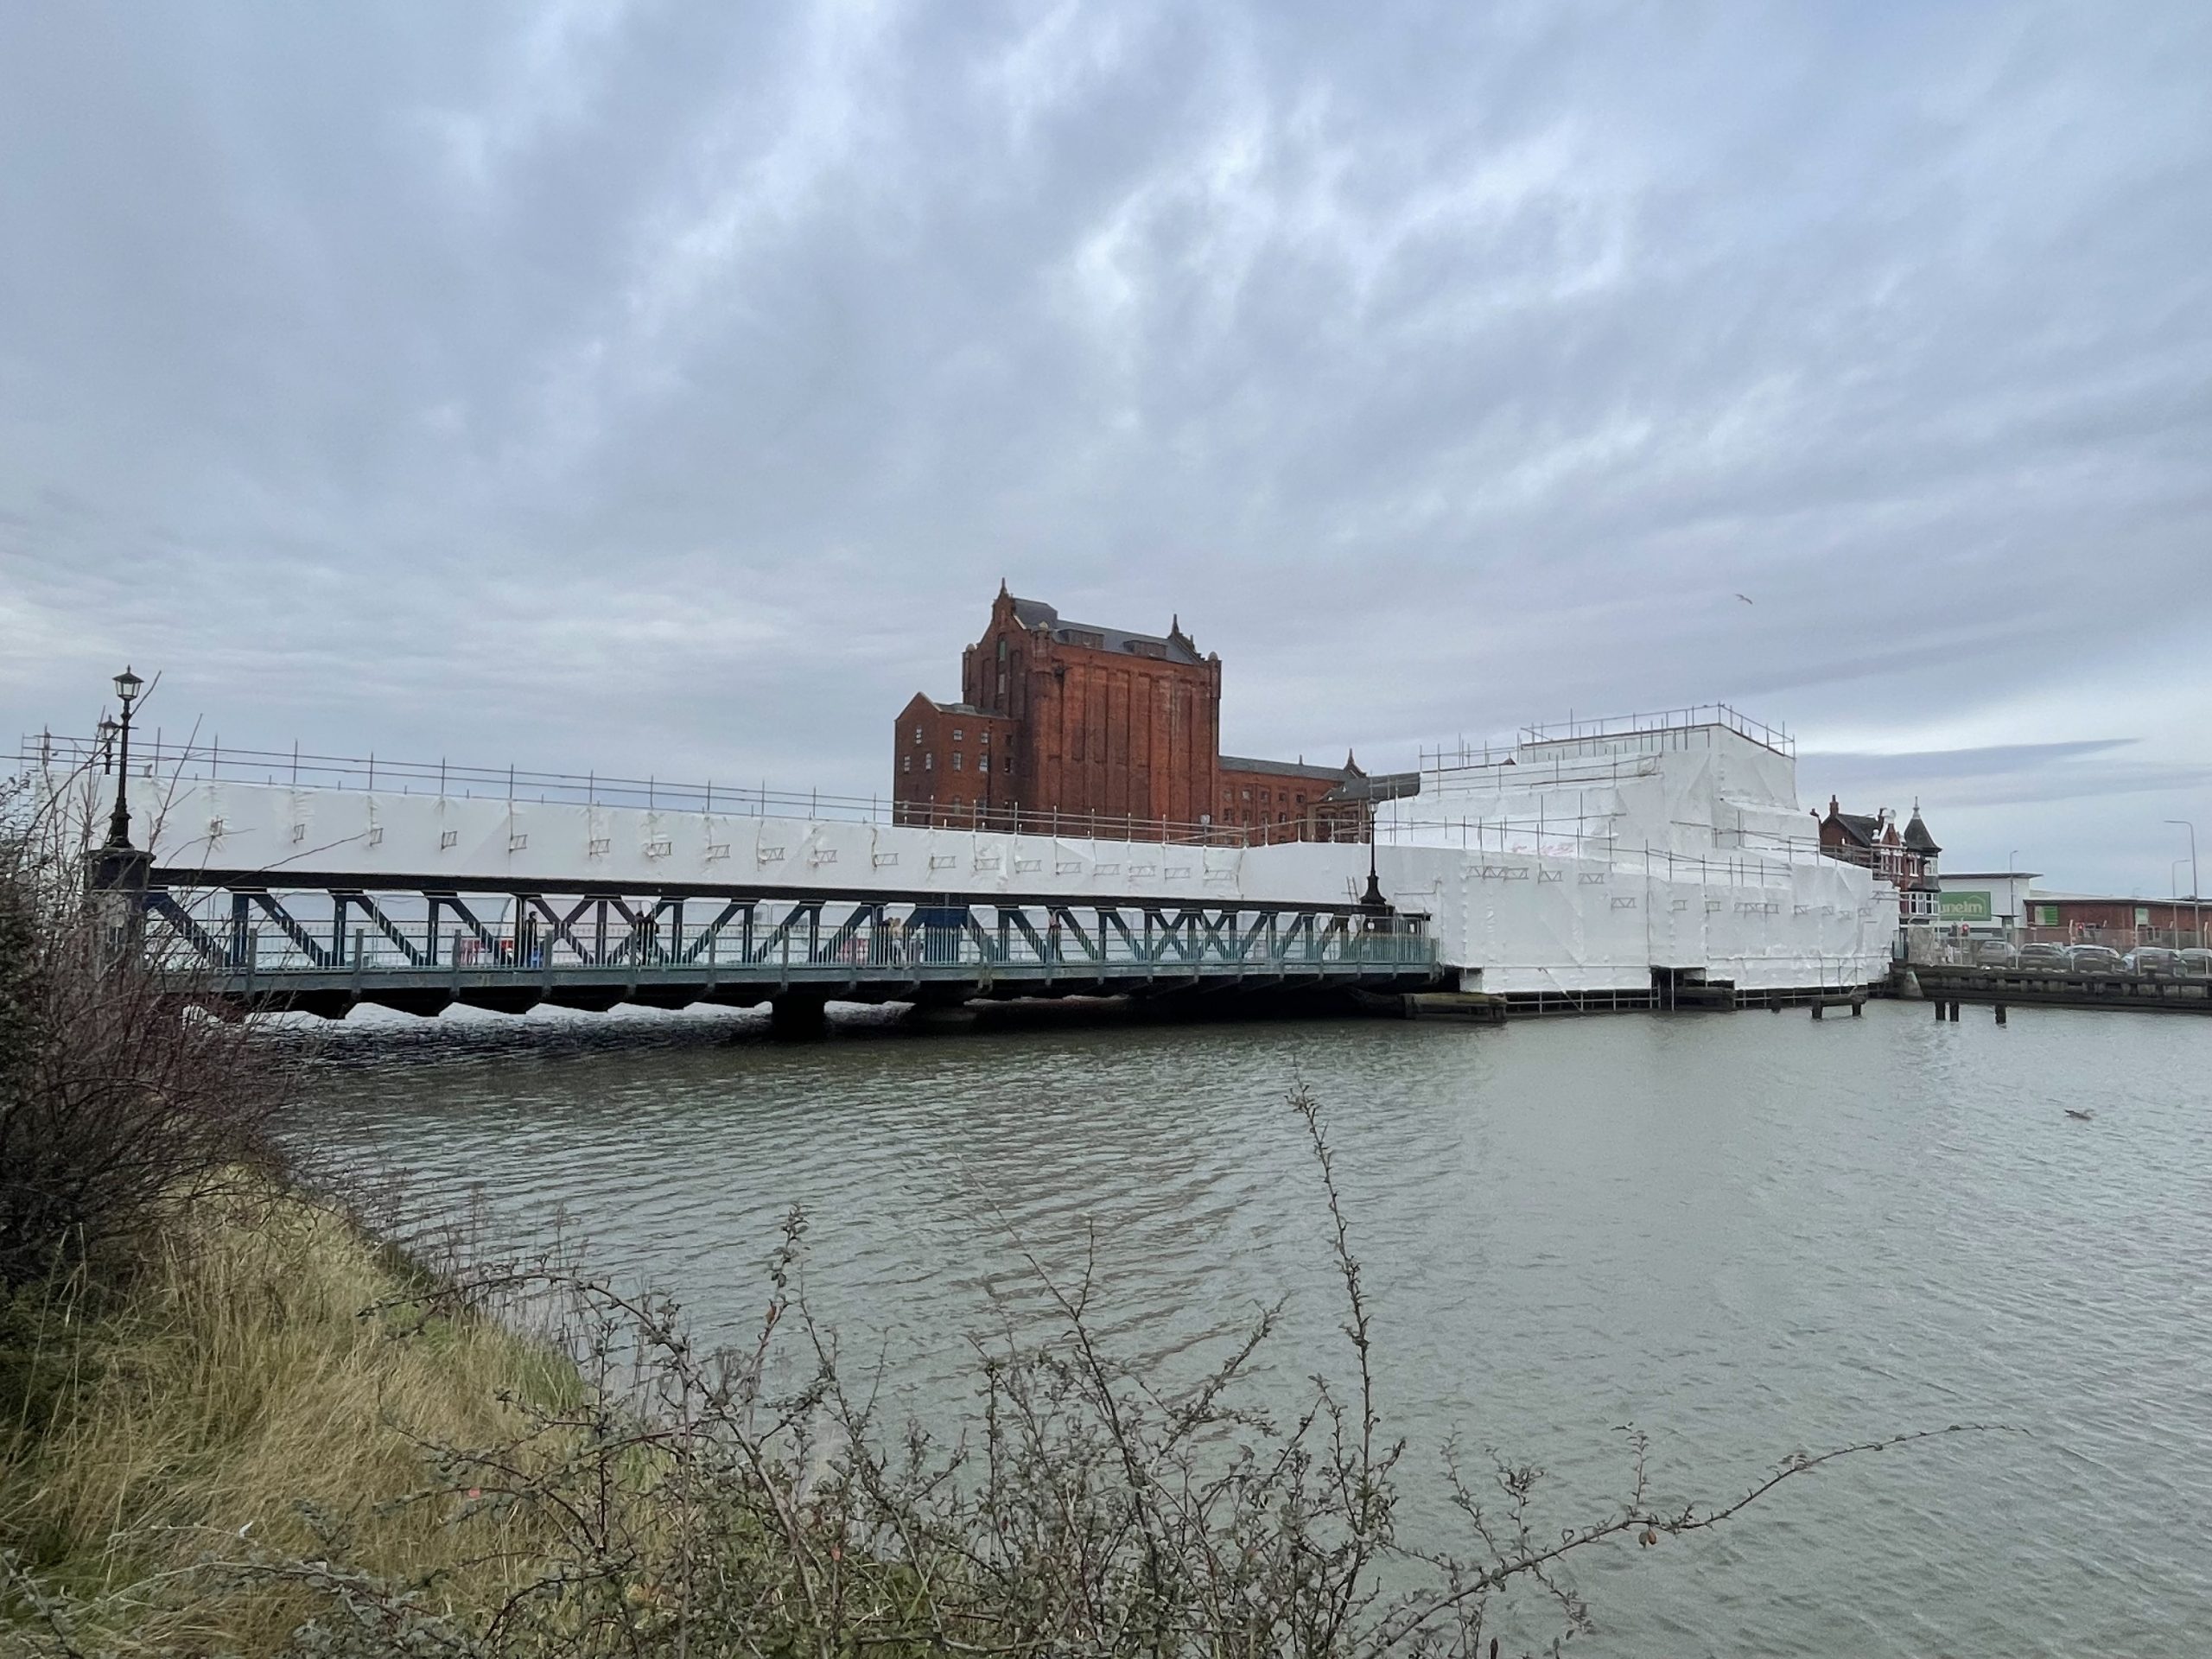 A photo of Corporation Road Bridge taken from a nearby wharf